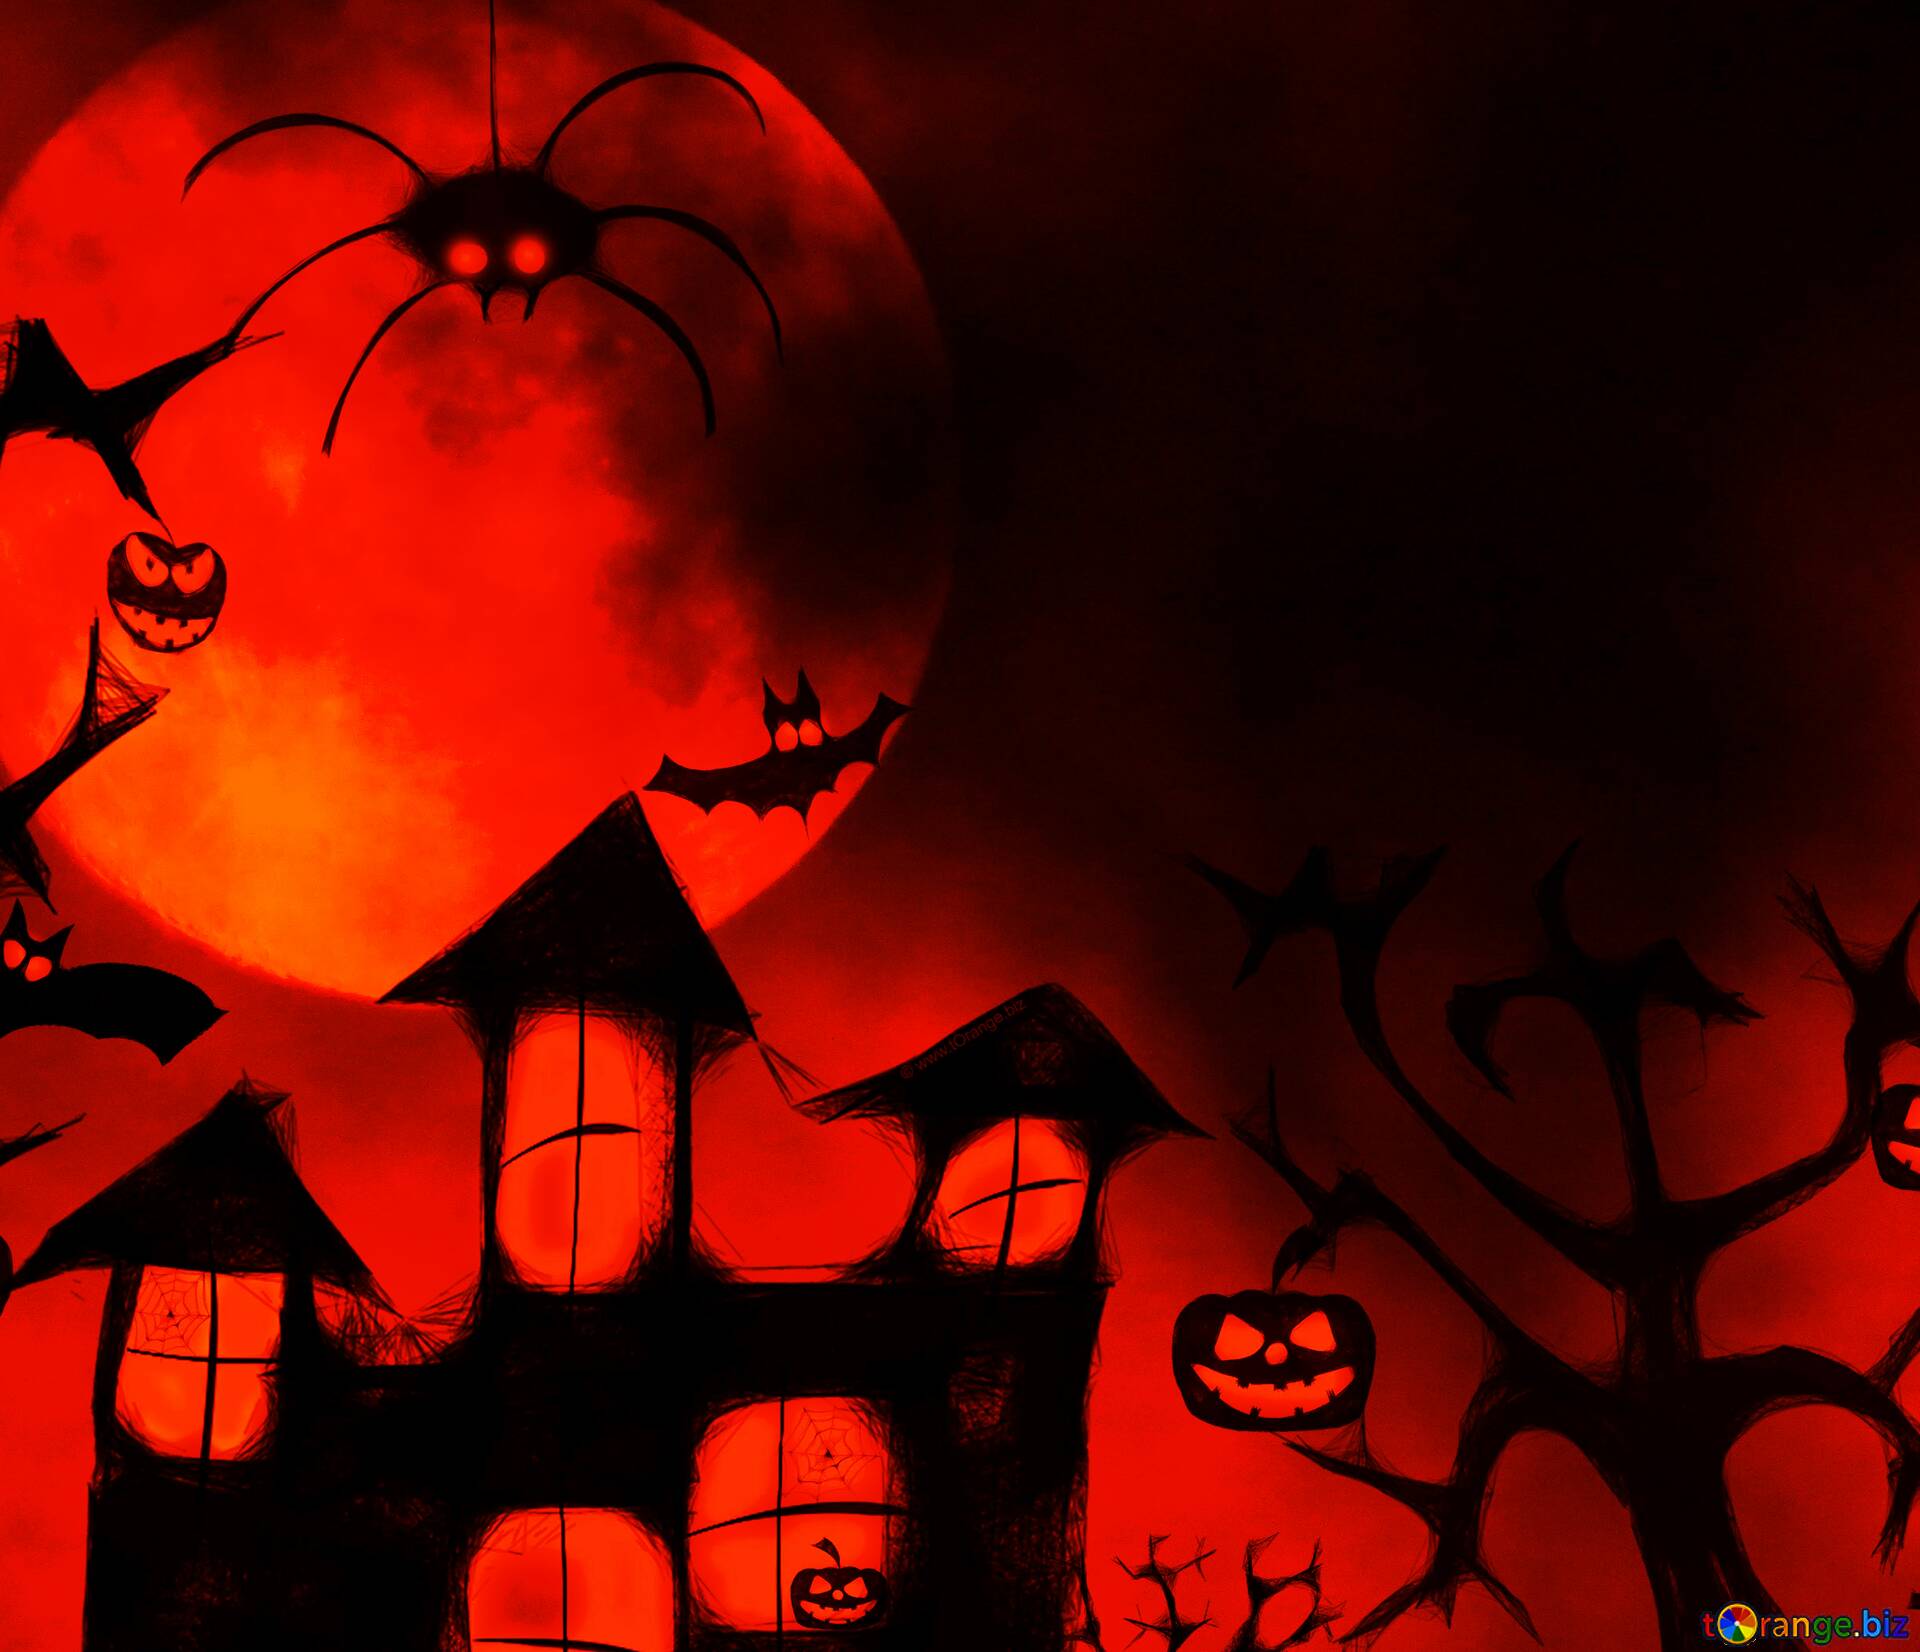 Download Free Picture Red Halloween Background On CC BY License Free Image Stock TOrange.biz Fx №183899